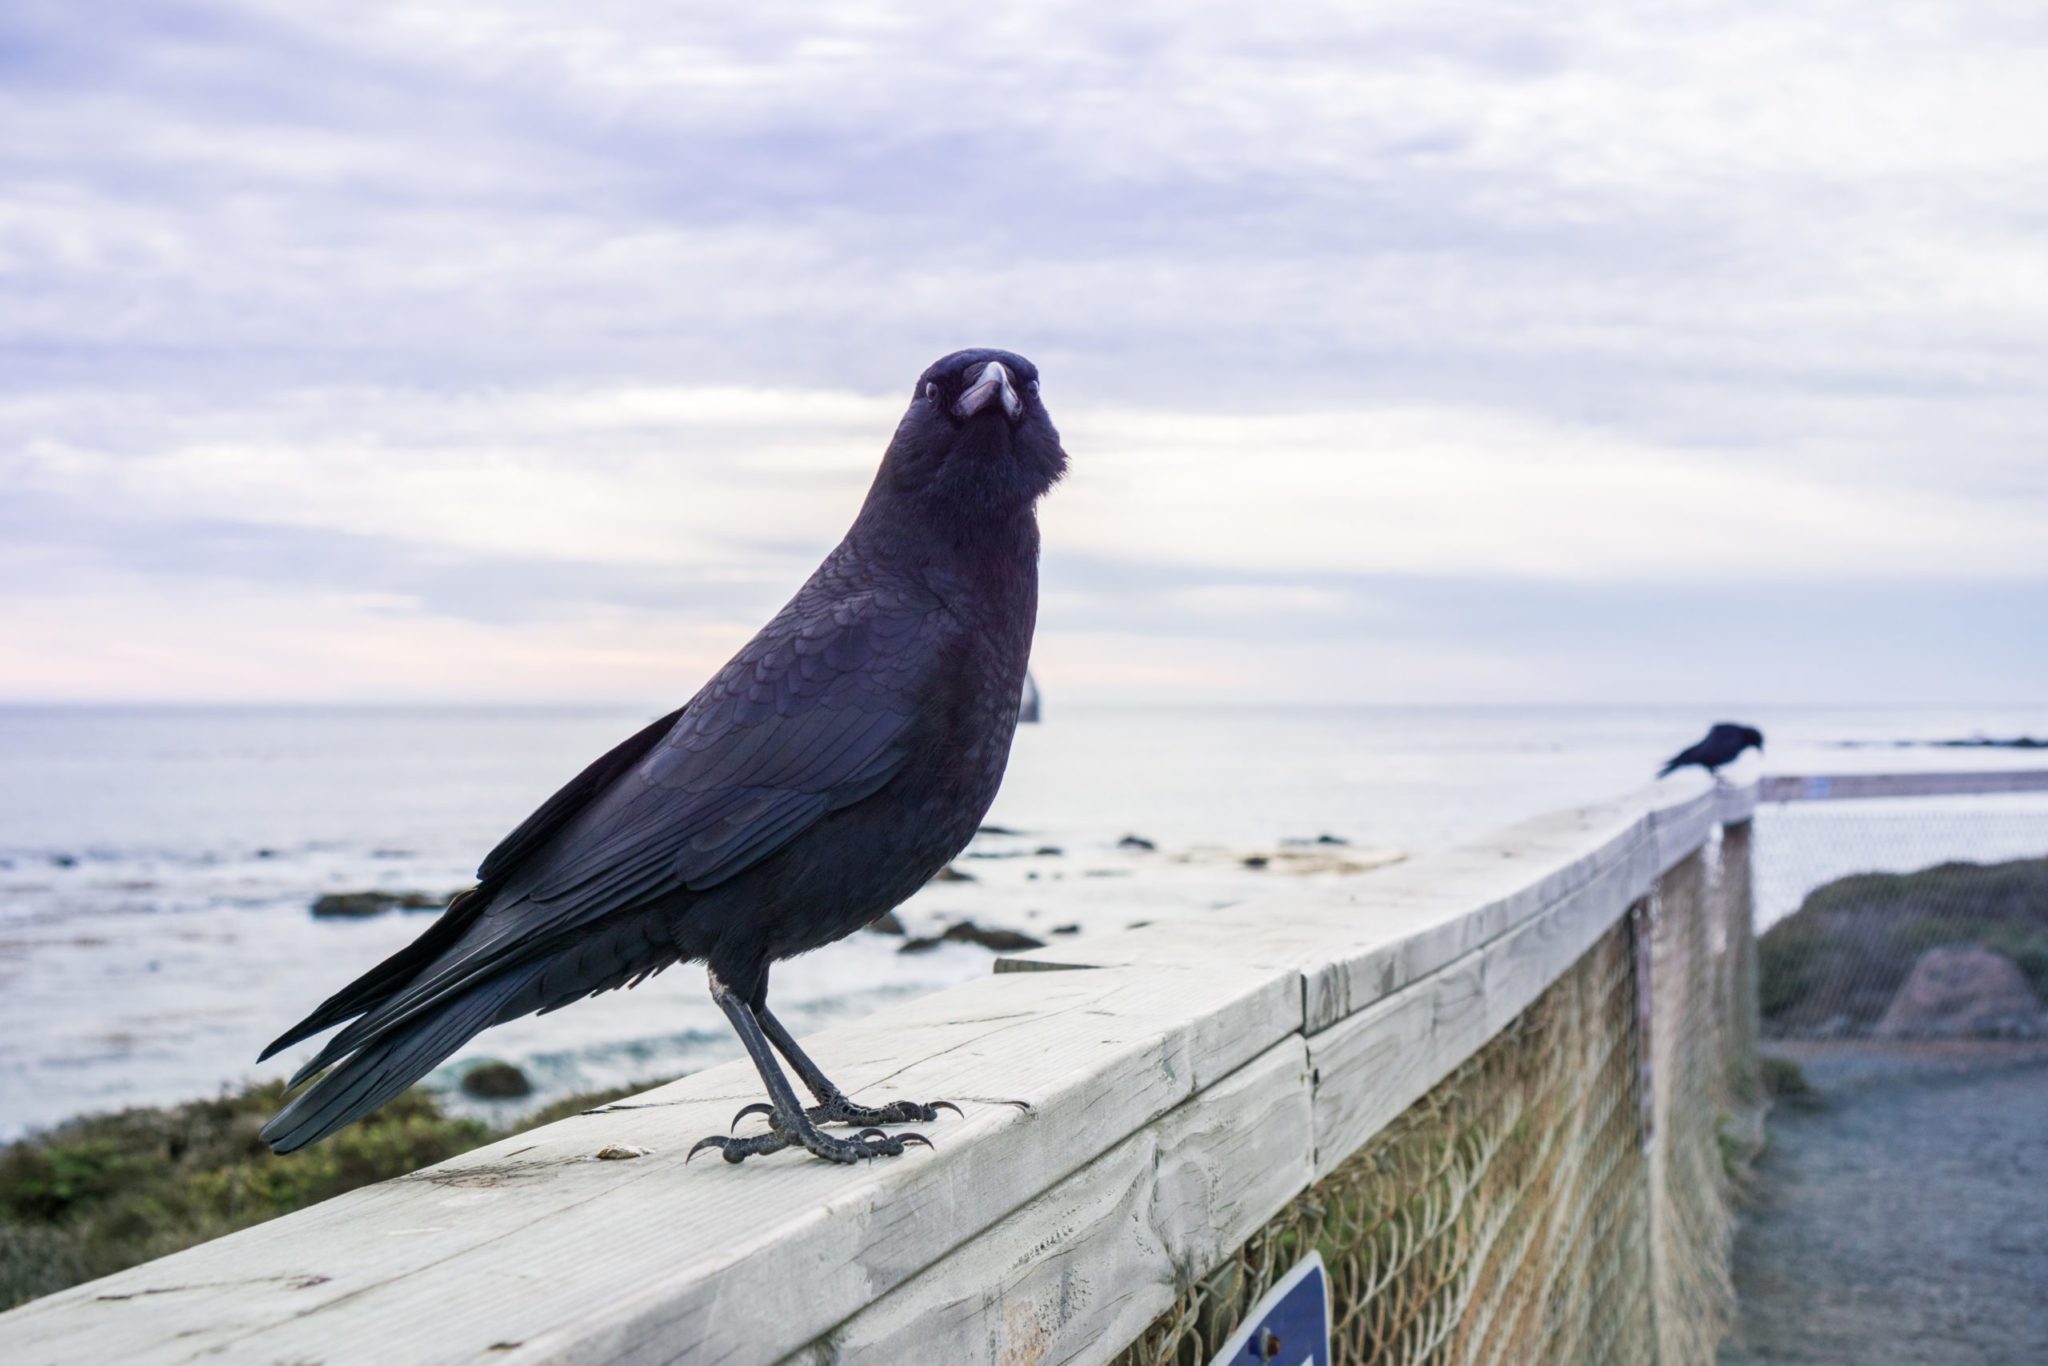 Close up of American Crow sitting on a wooden ledge; Pacific Ocean coastline in the background; San Simeon, California